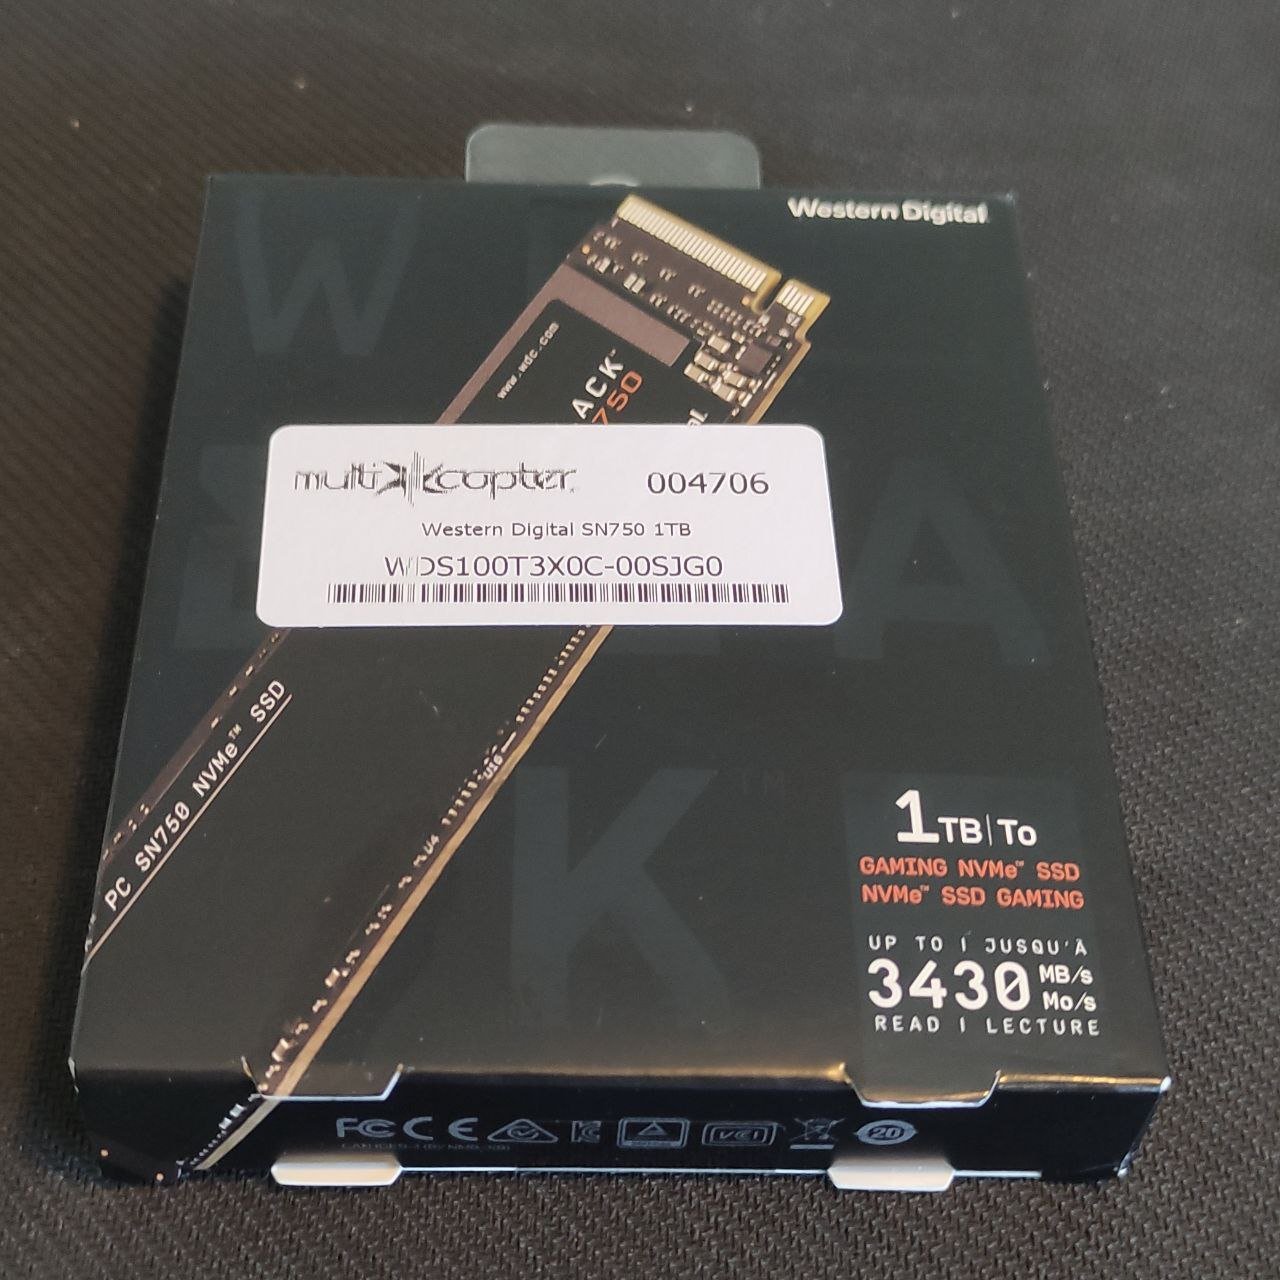 More information about "Western Digital SN750 SSD 1TB M.2 NVMe PCI Express 3.0"